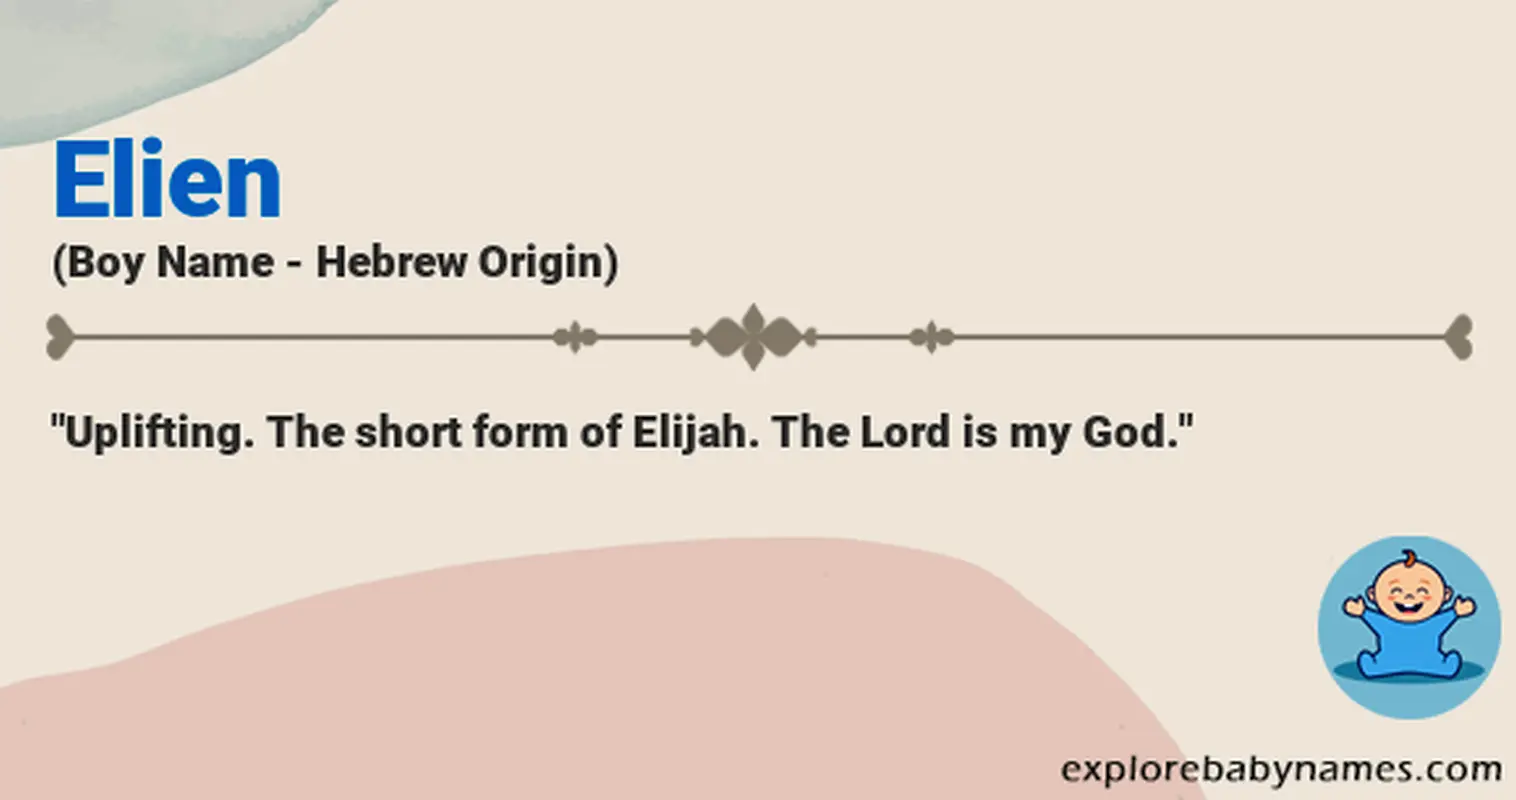 Meaning of Elien